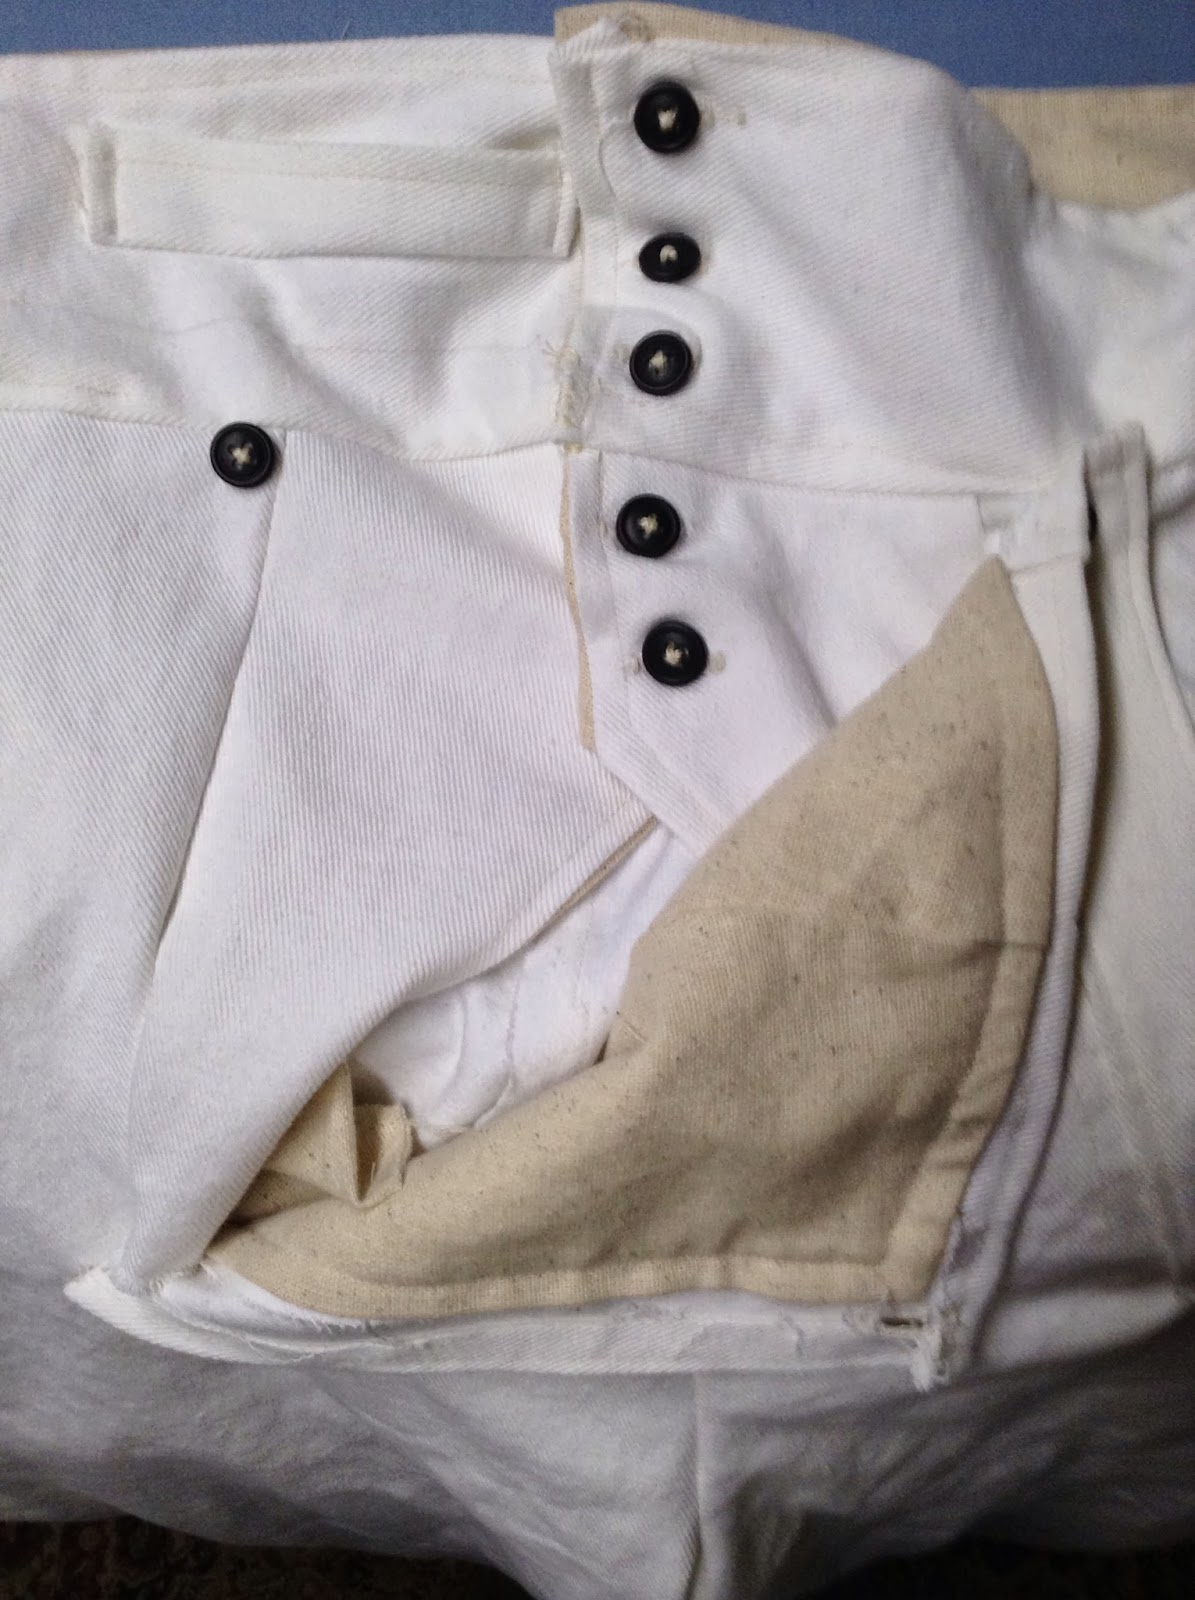 The Old Northwest Notebook: Sewing 1812 Trousers